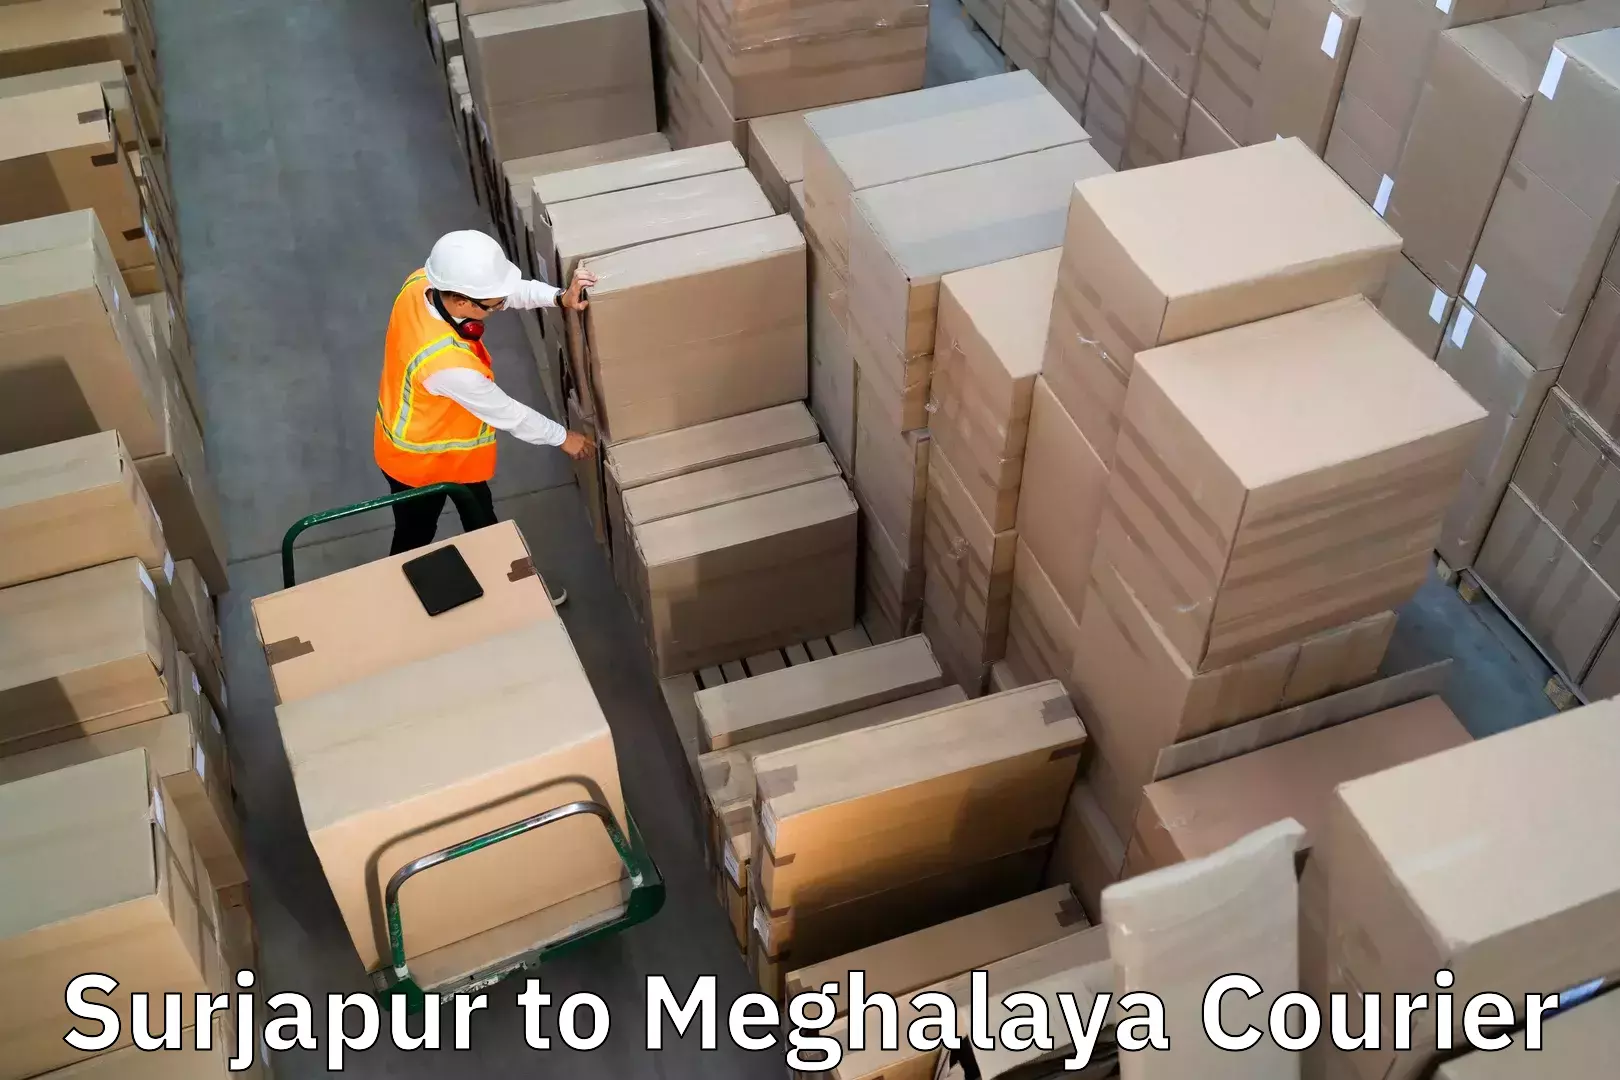 Instant baggage transport quote Surjapur to Dkhiah West